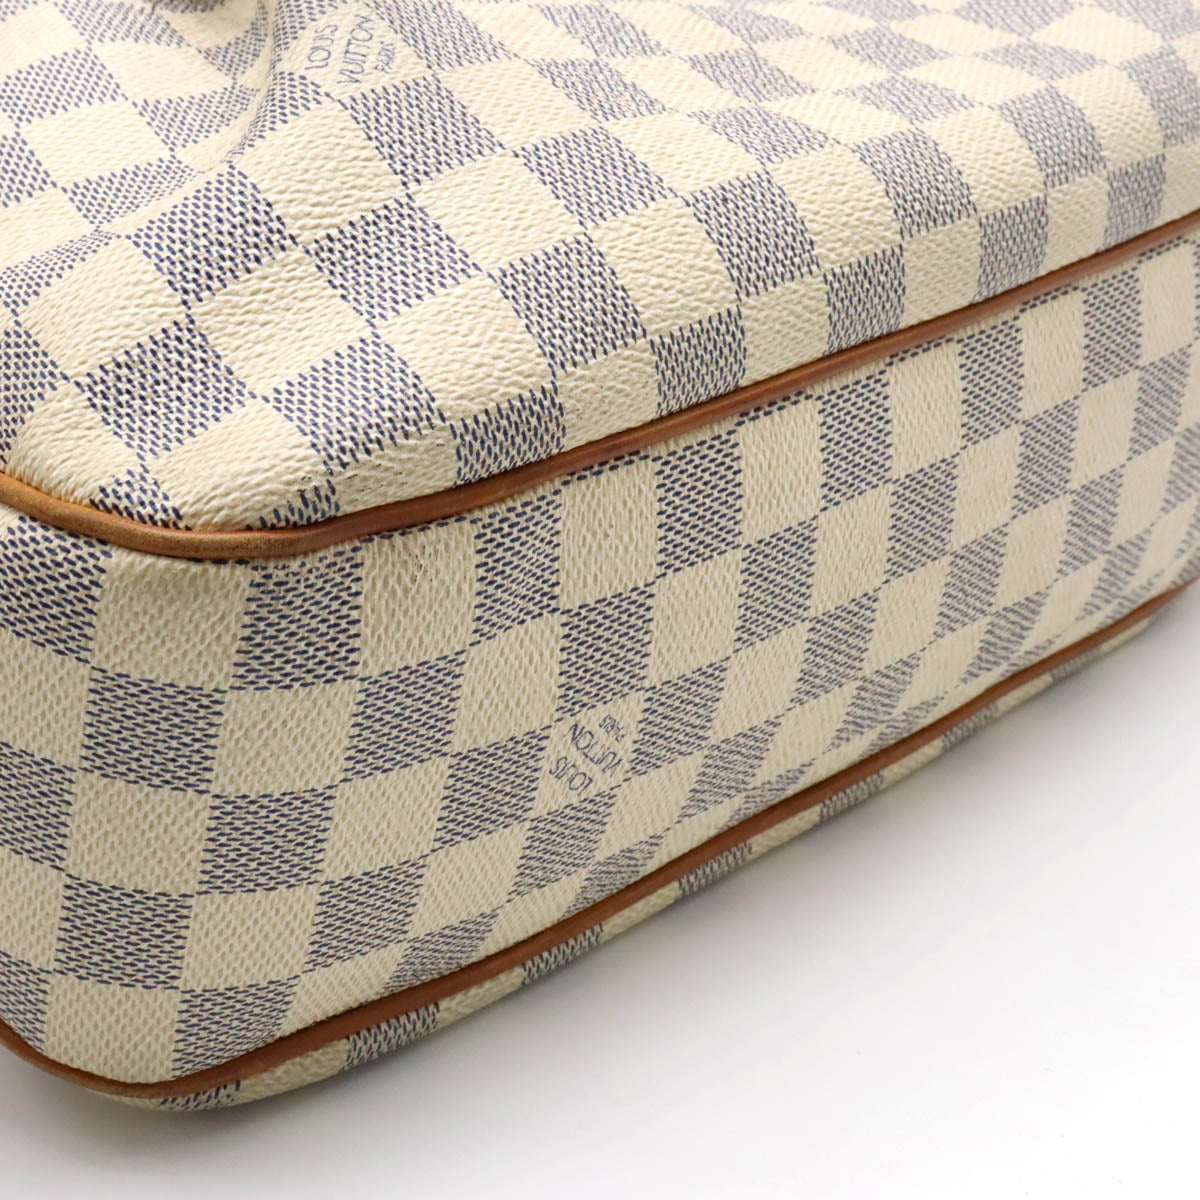 Authenticated Used Louis Vuitton Shoulder Bag Damier Azur Siracusa PM  Ladies N41113 